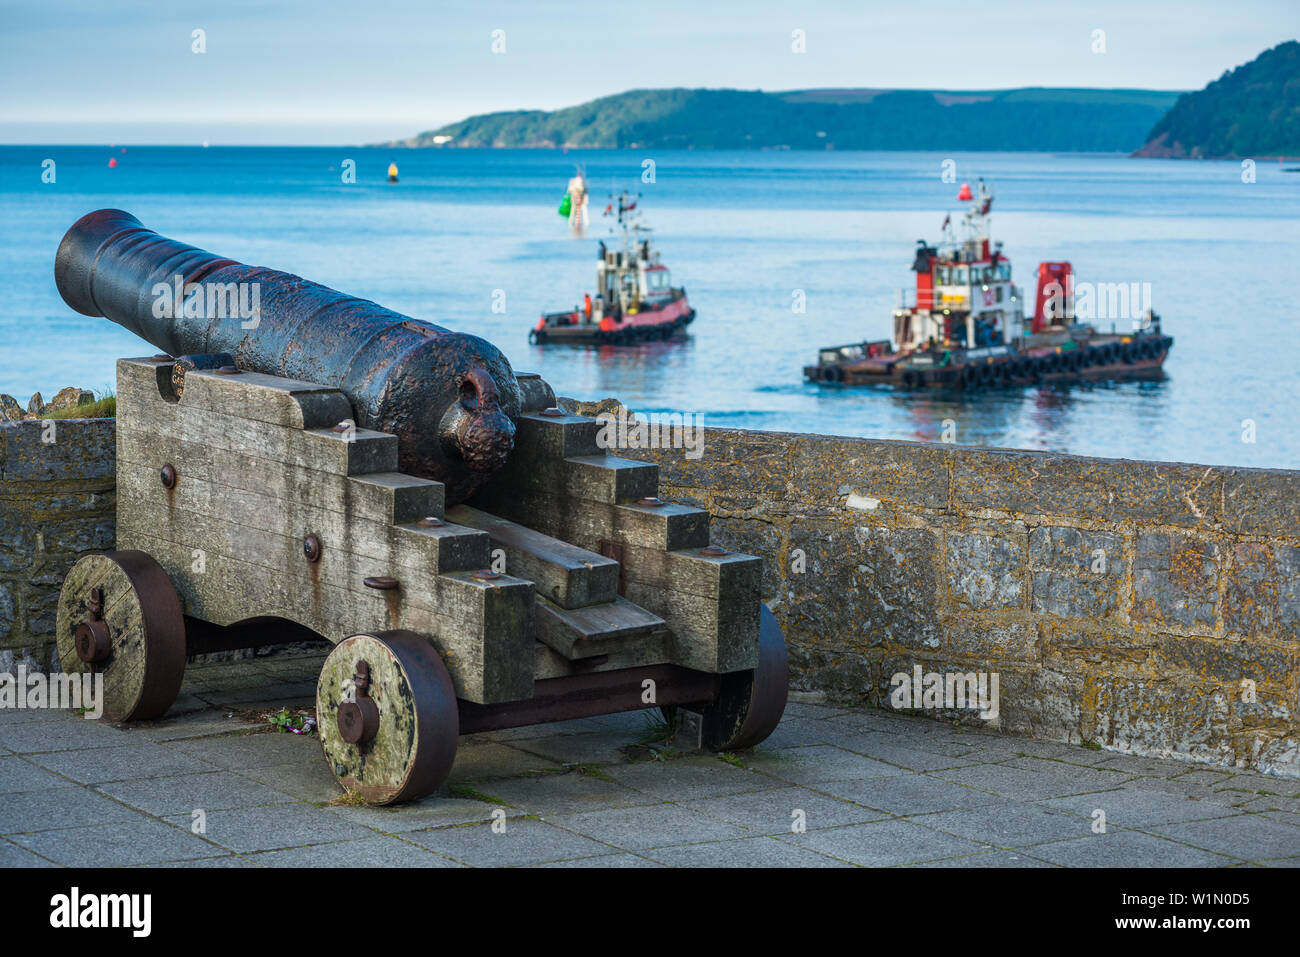 A restored 19th century Blomefield design cast iron cannon points across the water as boats passby, on Plymouth seafront in south Devon, UK Stock Photo